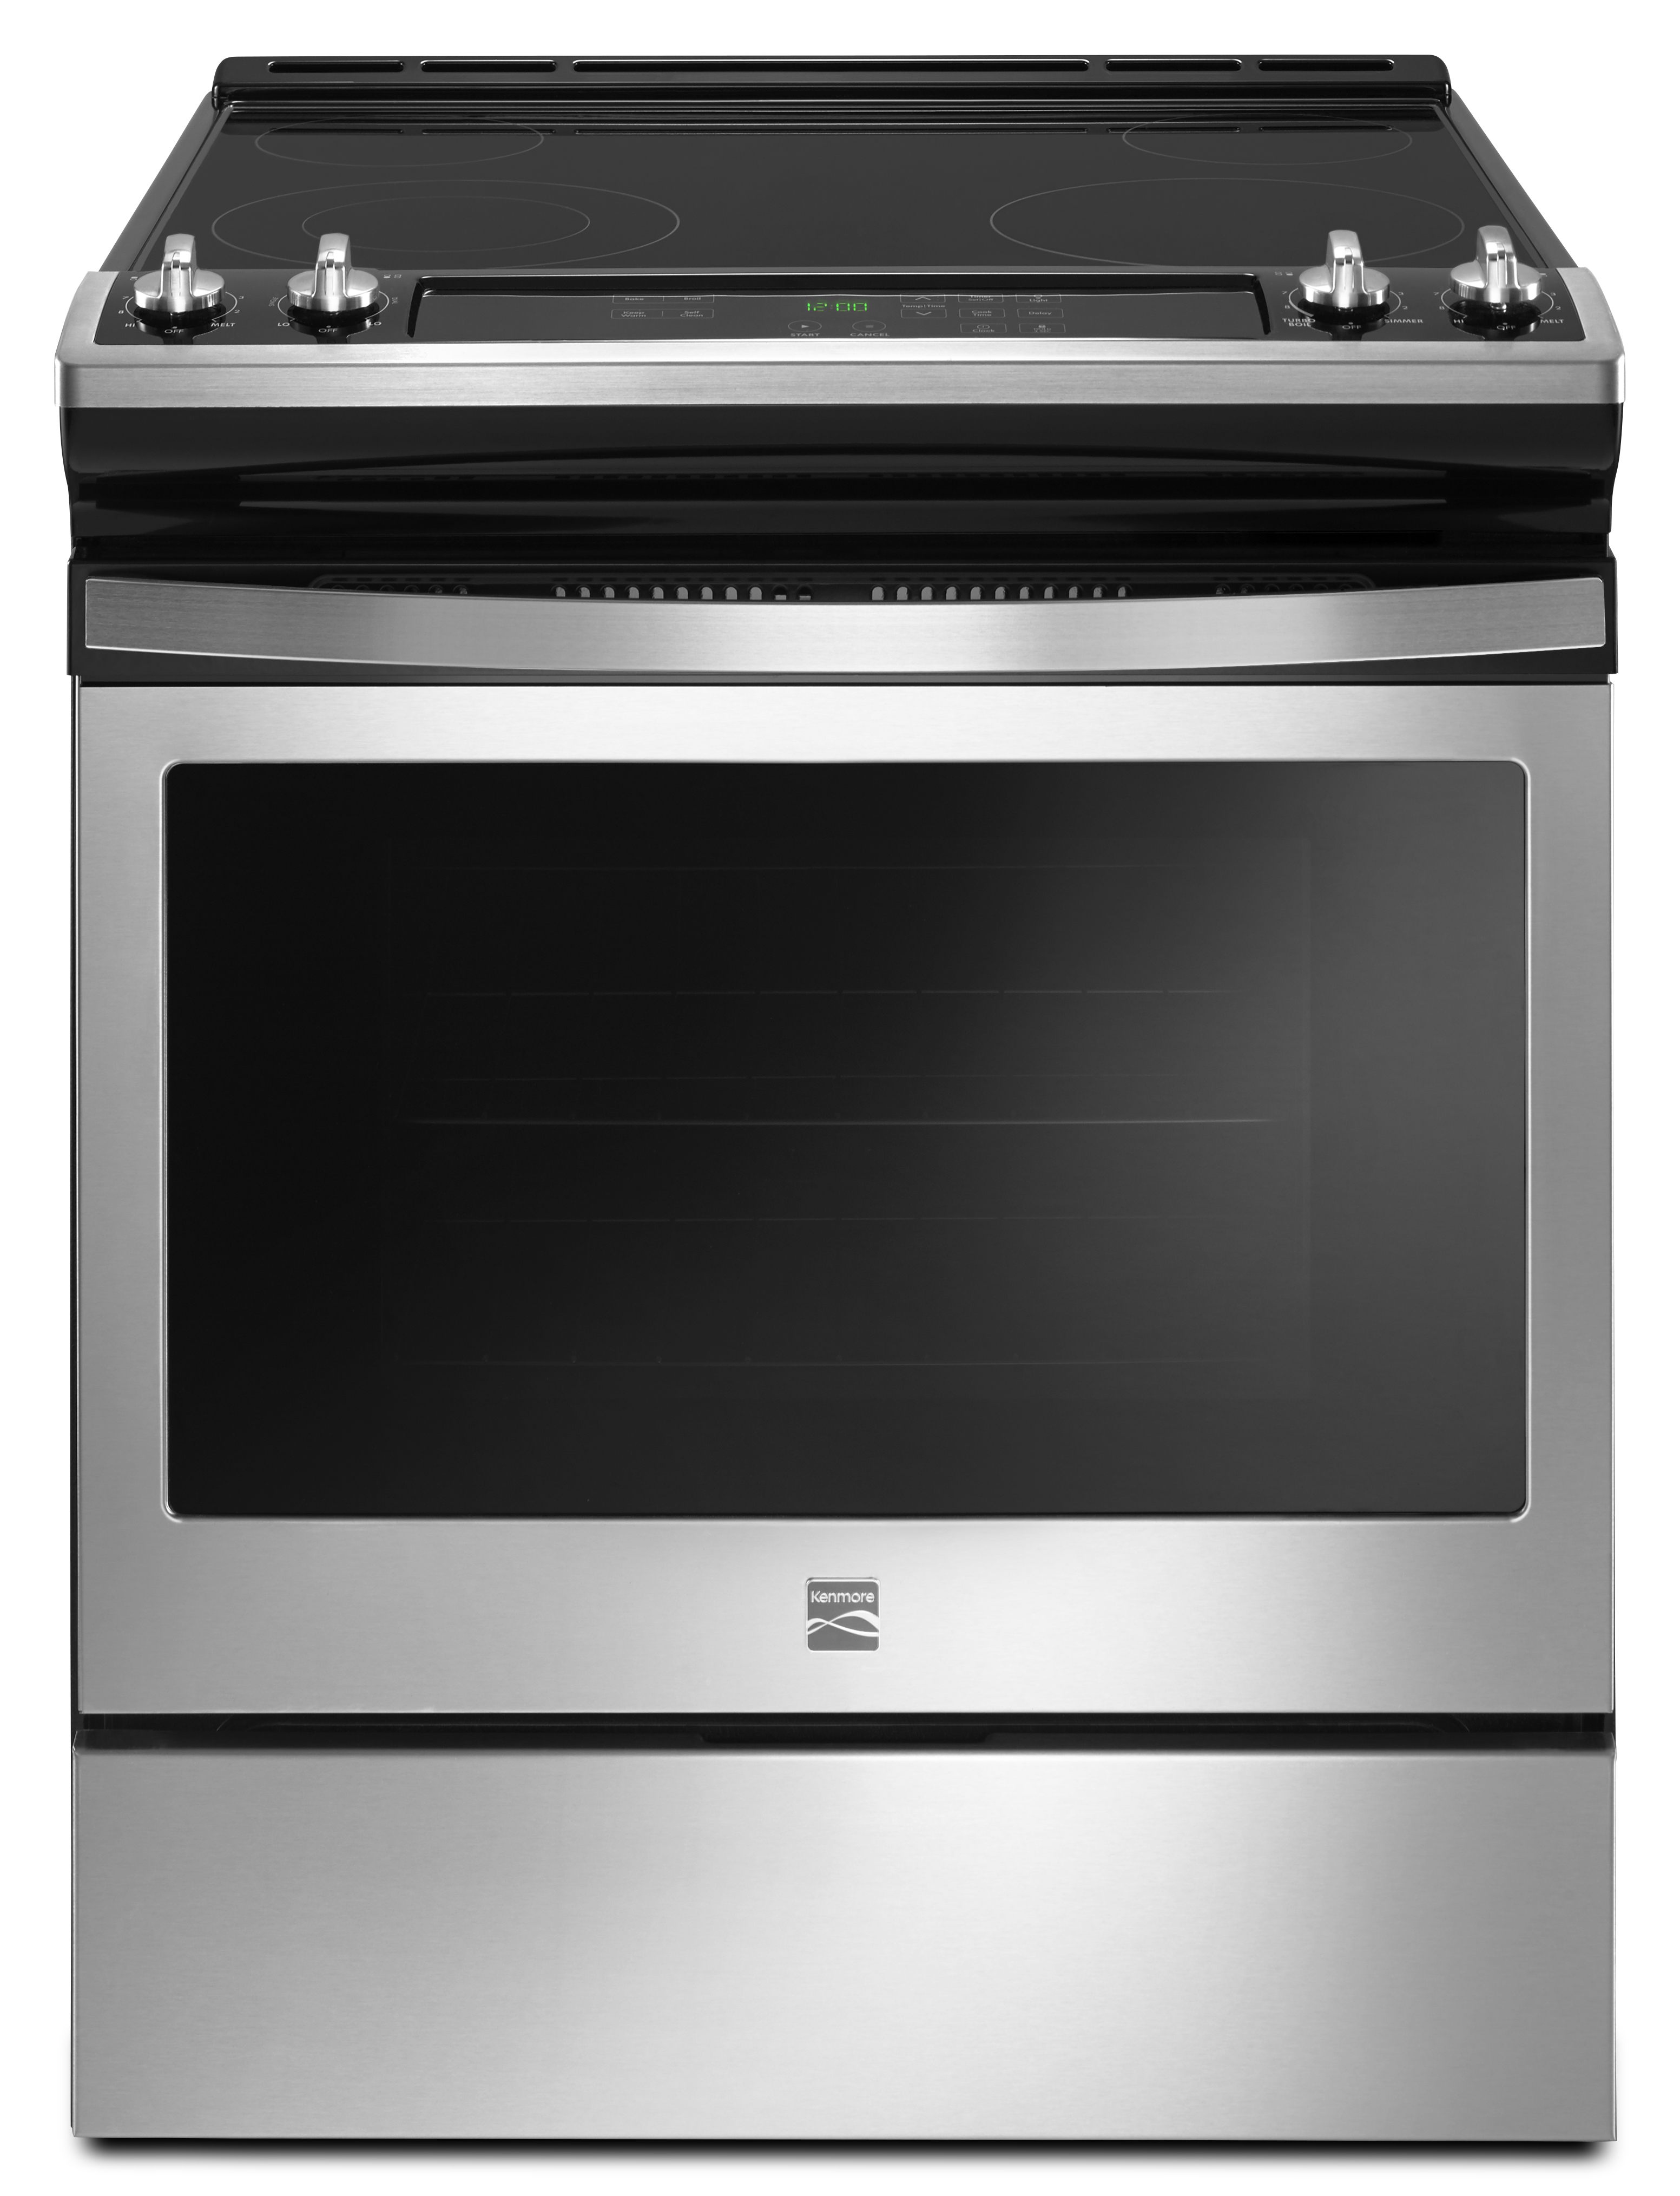 Kenmore Kenmore 95113 4.8 cu. ft. Freestanding Electric Range with Turbo Boil – Stainless Steel